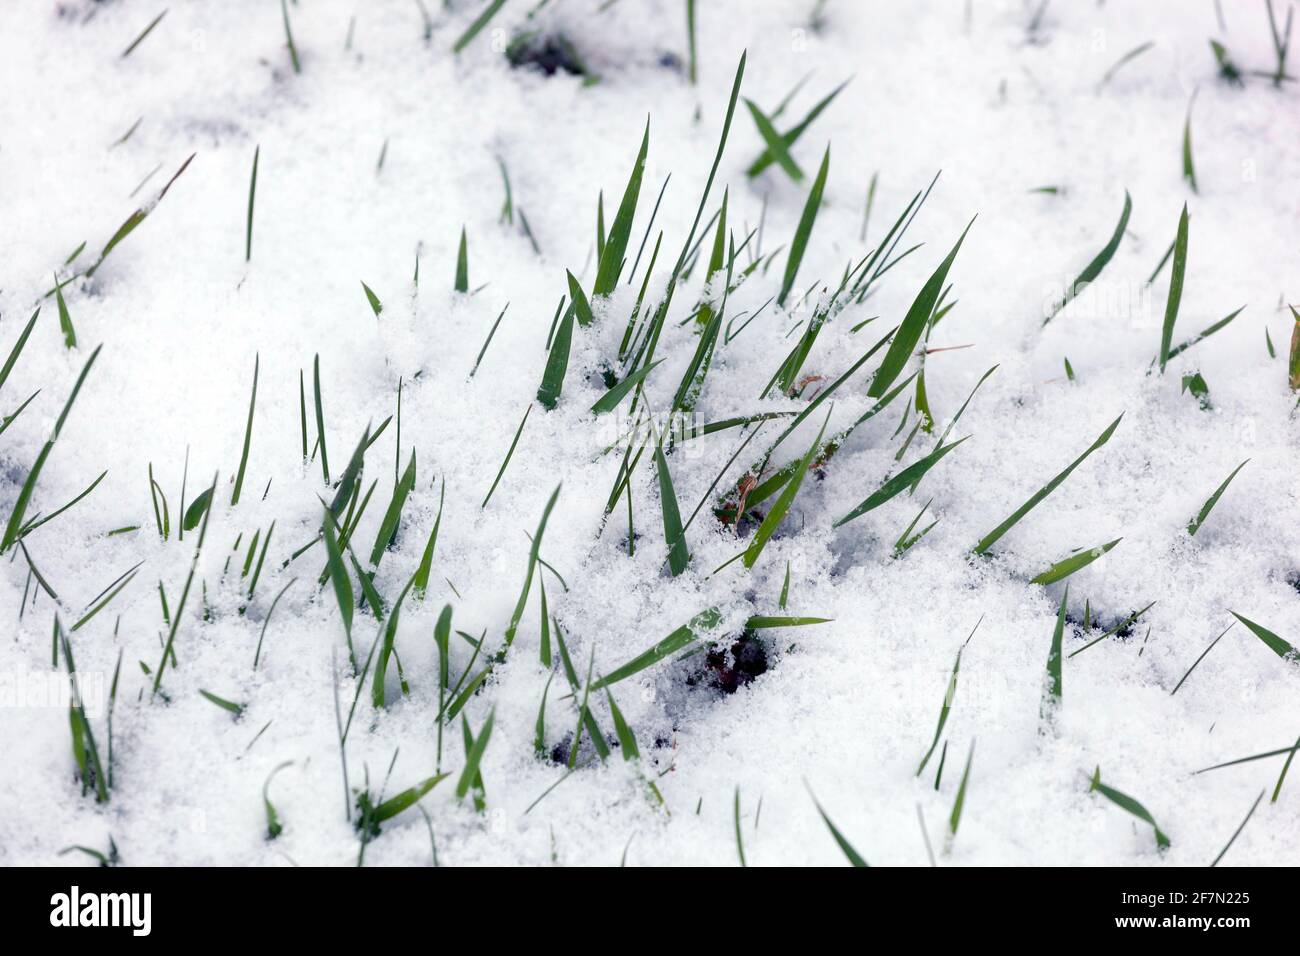 Fresh grass snow-covered winter grasses lawn Stock Photo